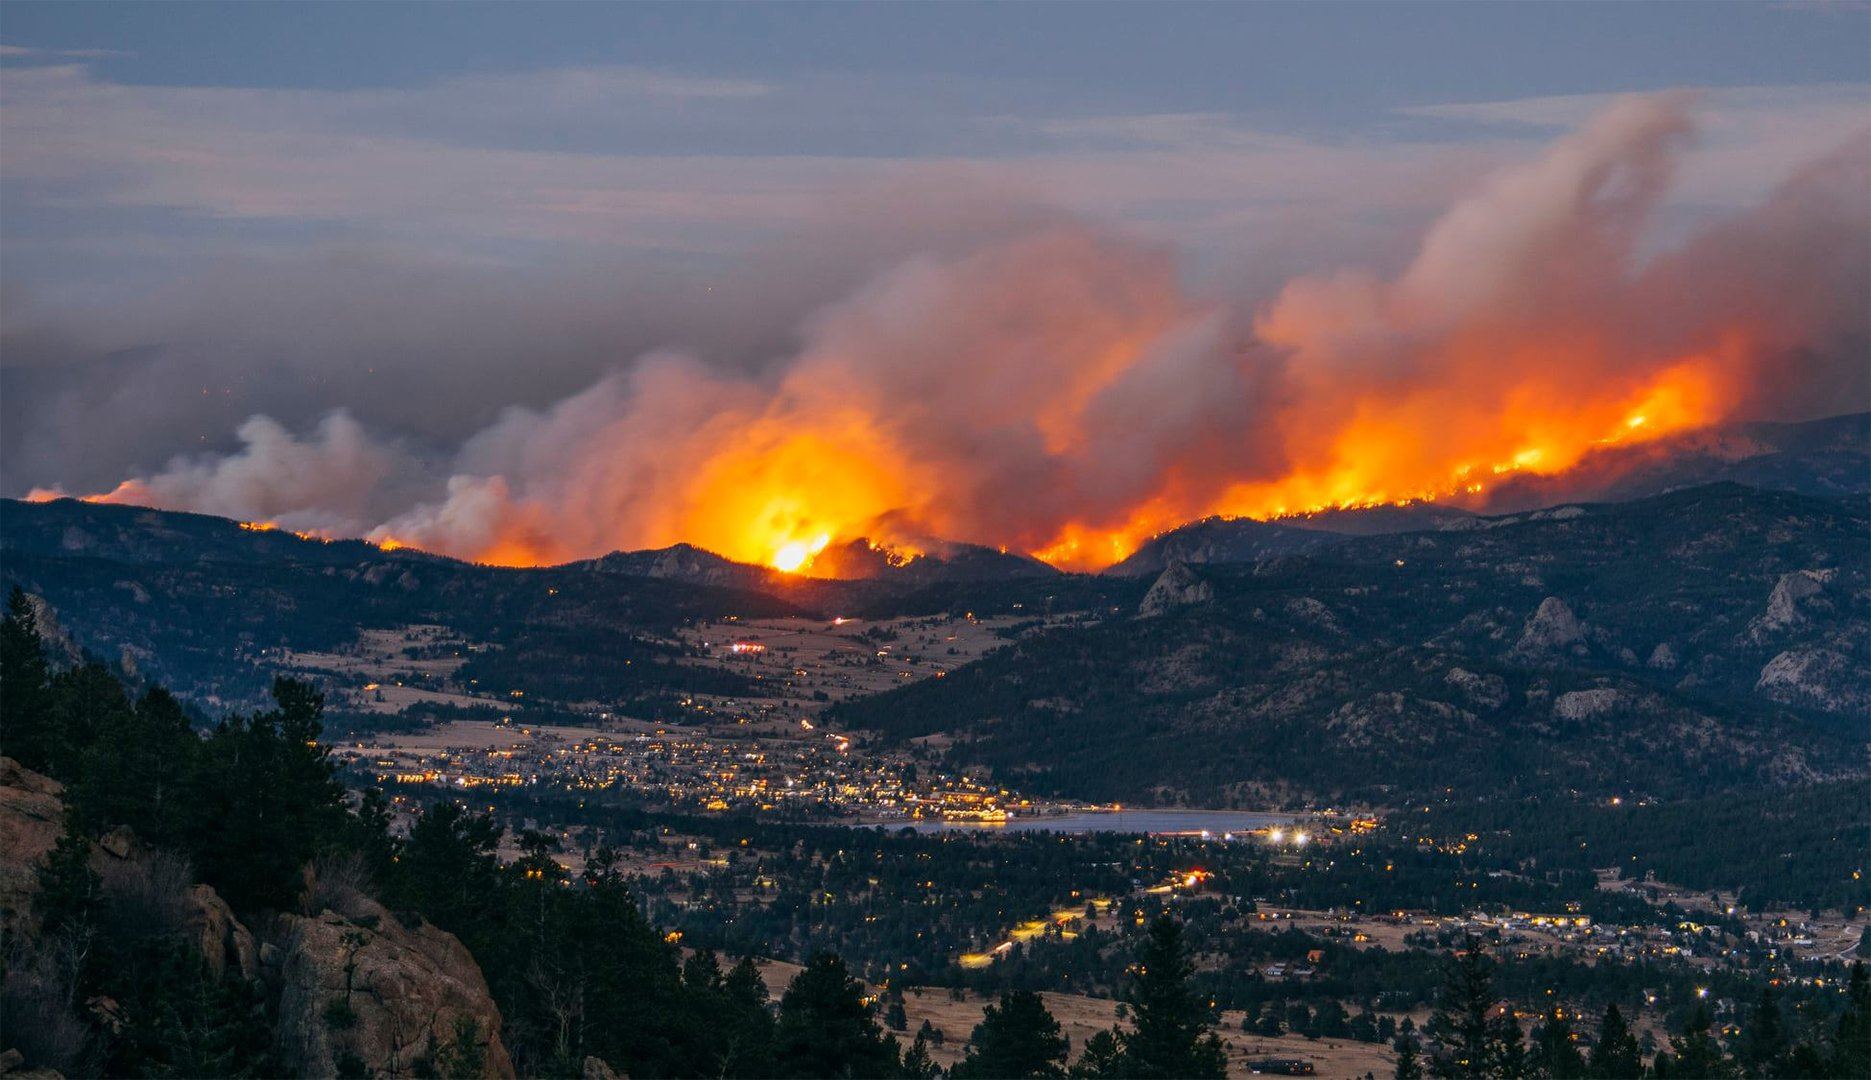 East Troublesome Fire on the slopes above Lake Estes, Colorado-Big Thompson Project, 2020